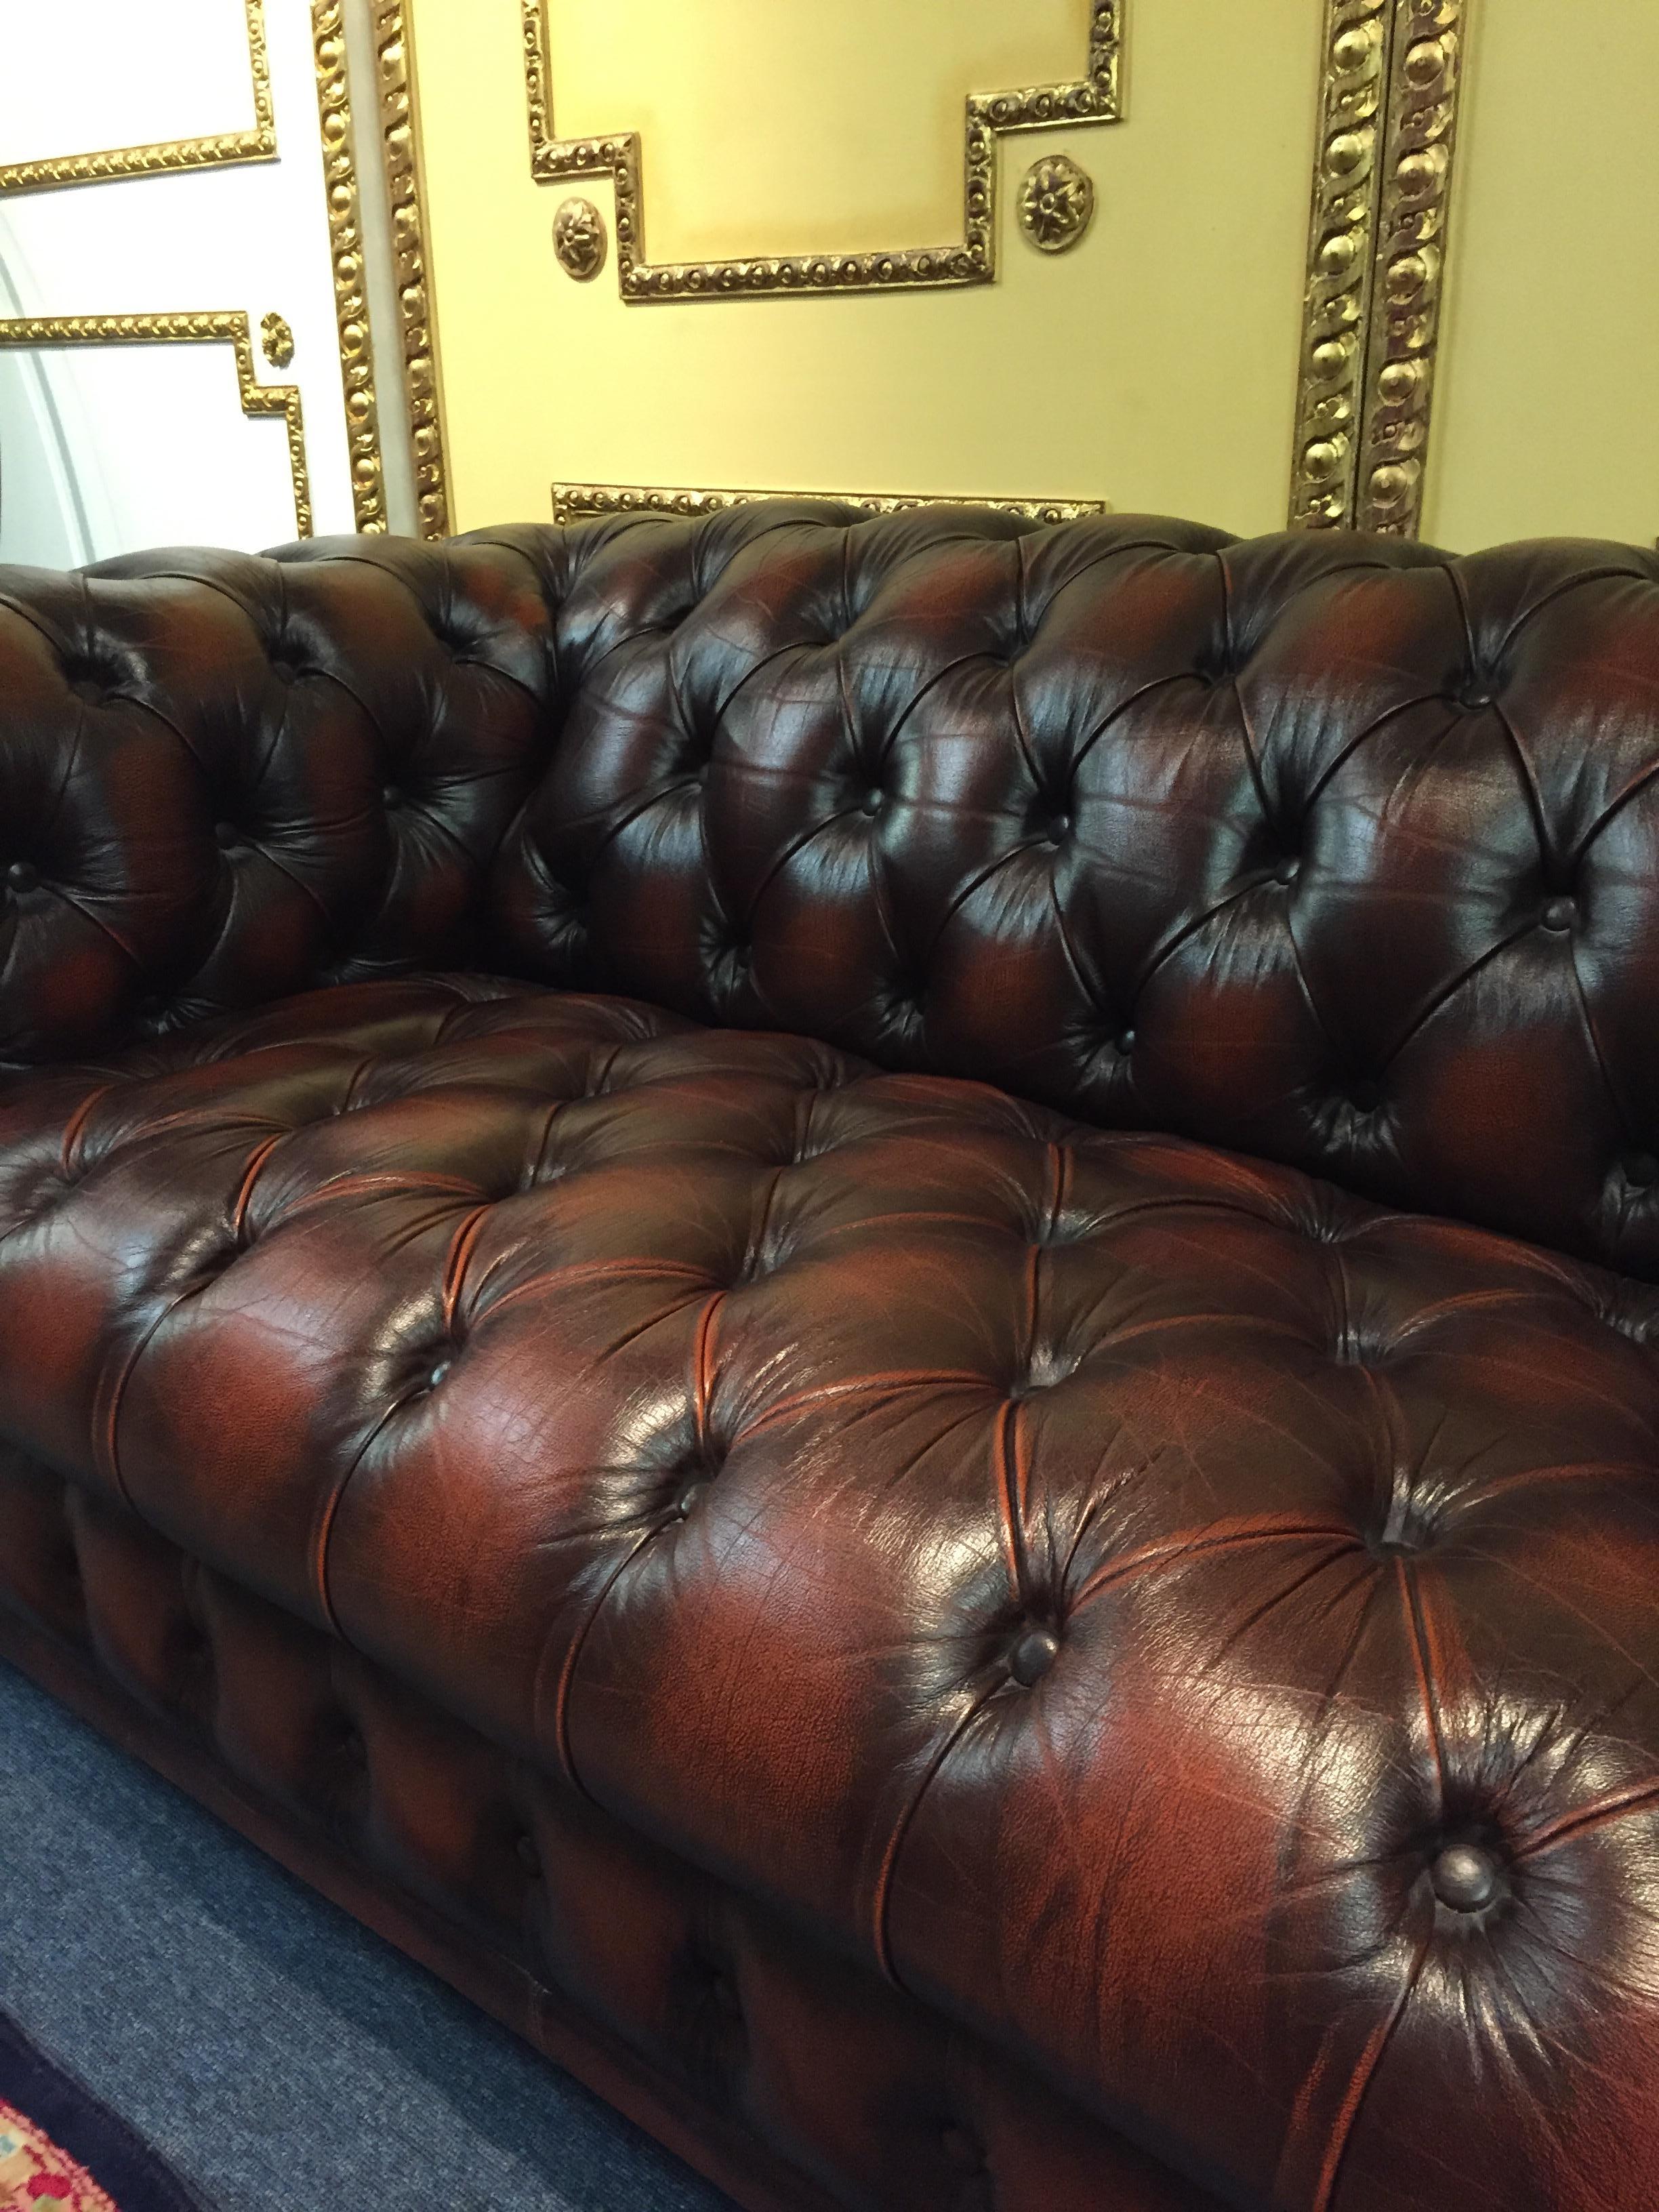 Leather High Quality Chesterfield Two-Seat Sofa Made in England